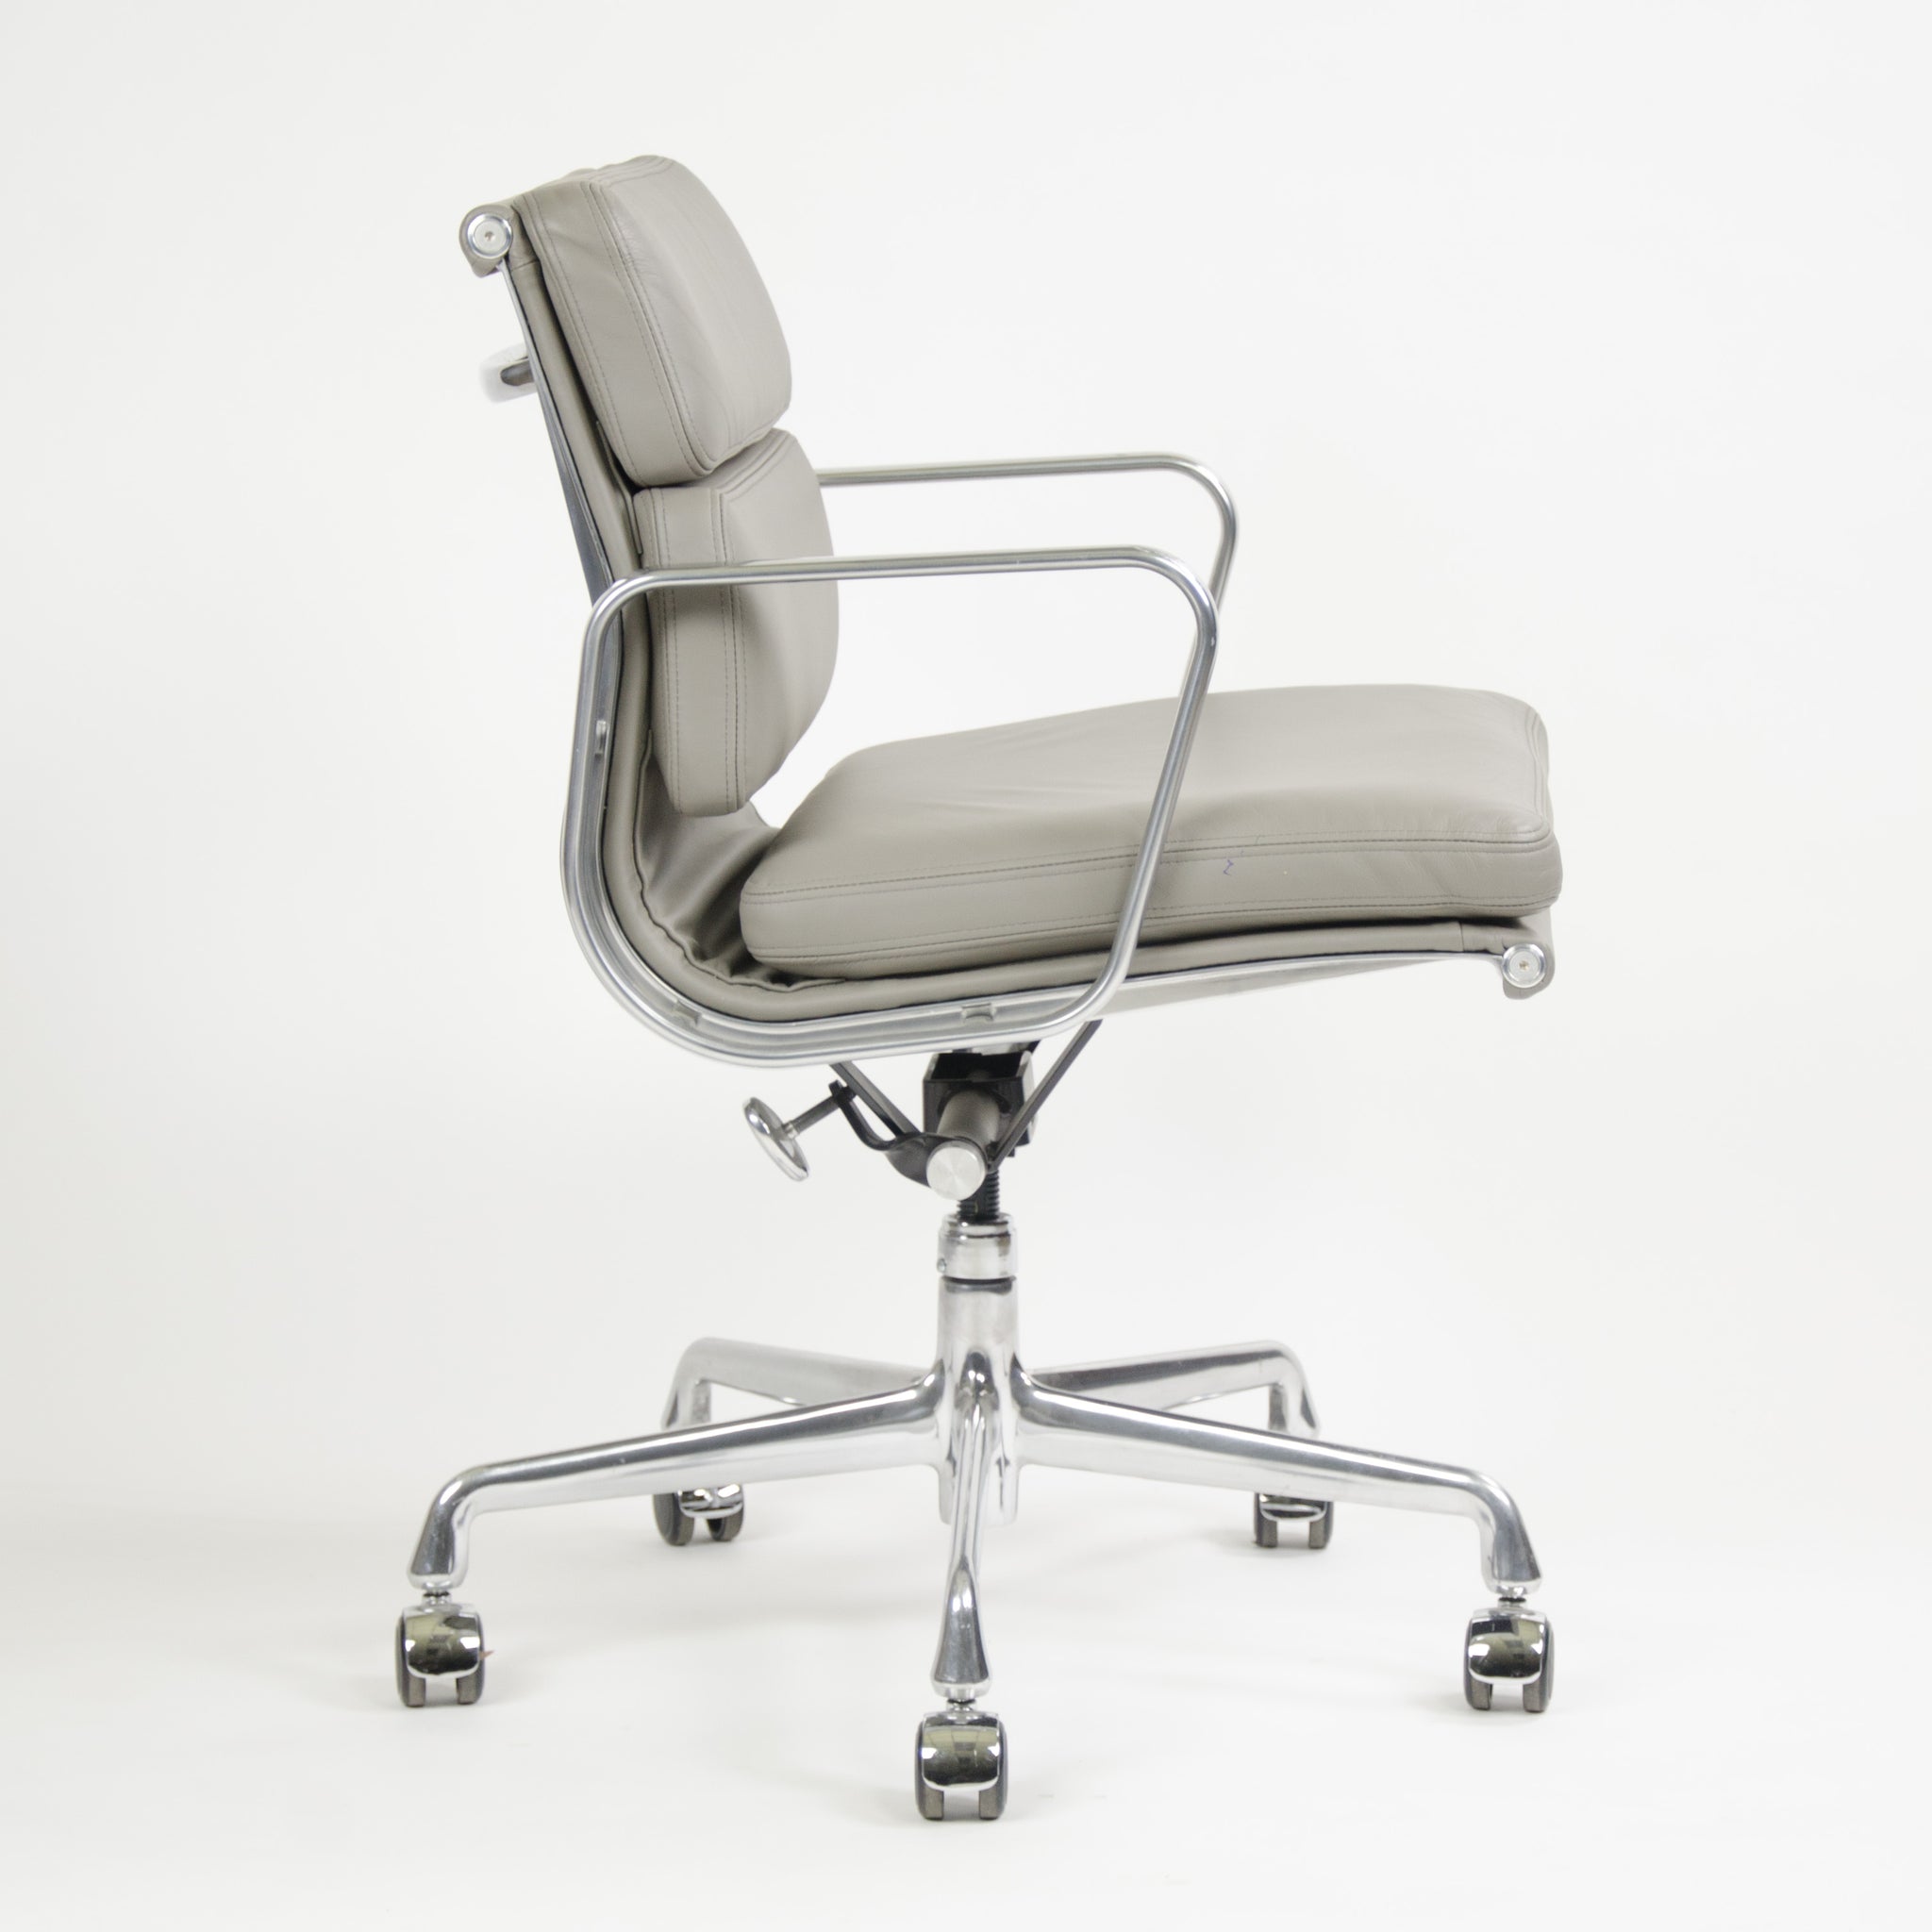 SOLD Herman Miller Eames Soft Pad Aluminum Group Chair Light Gray Leather 2013